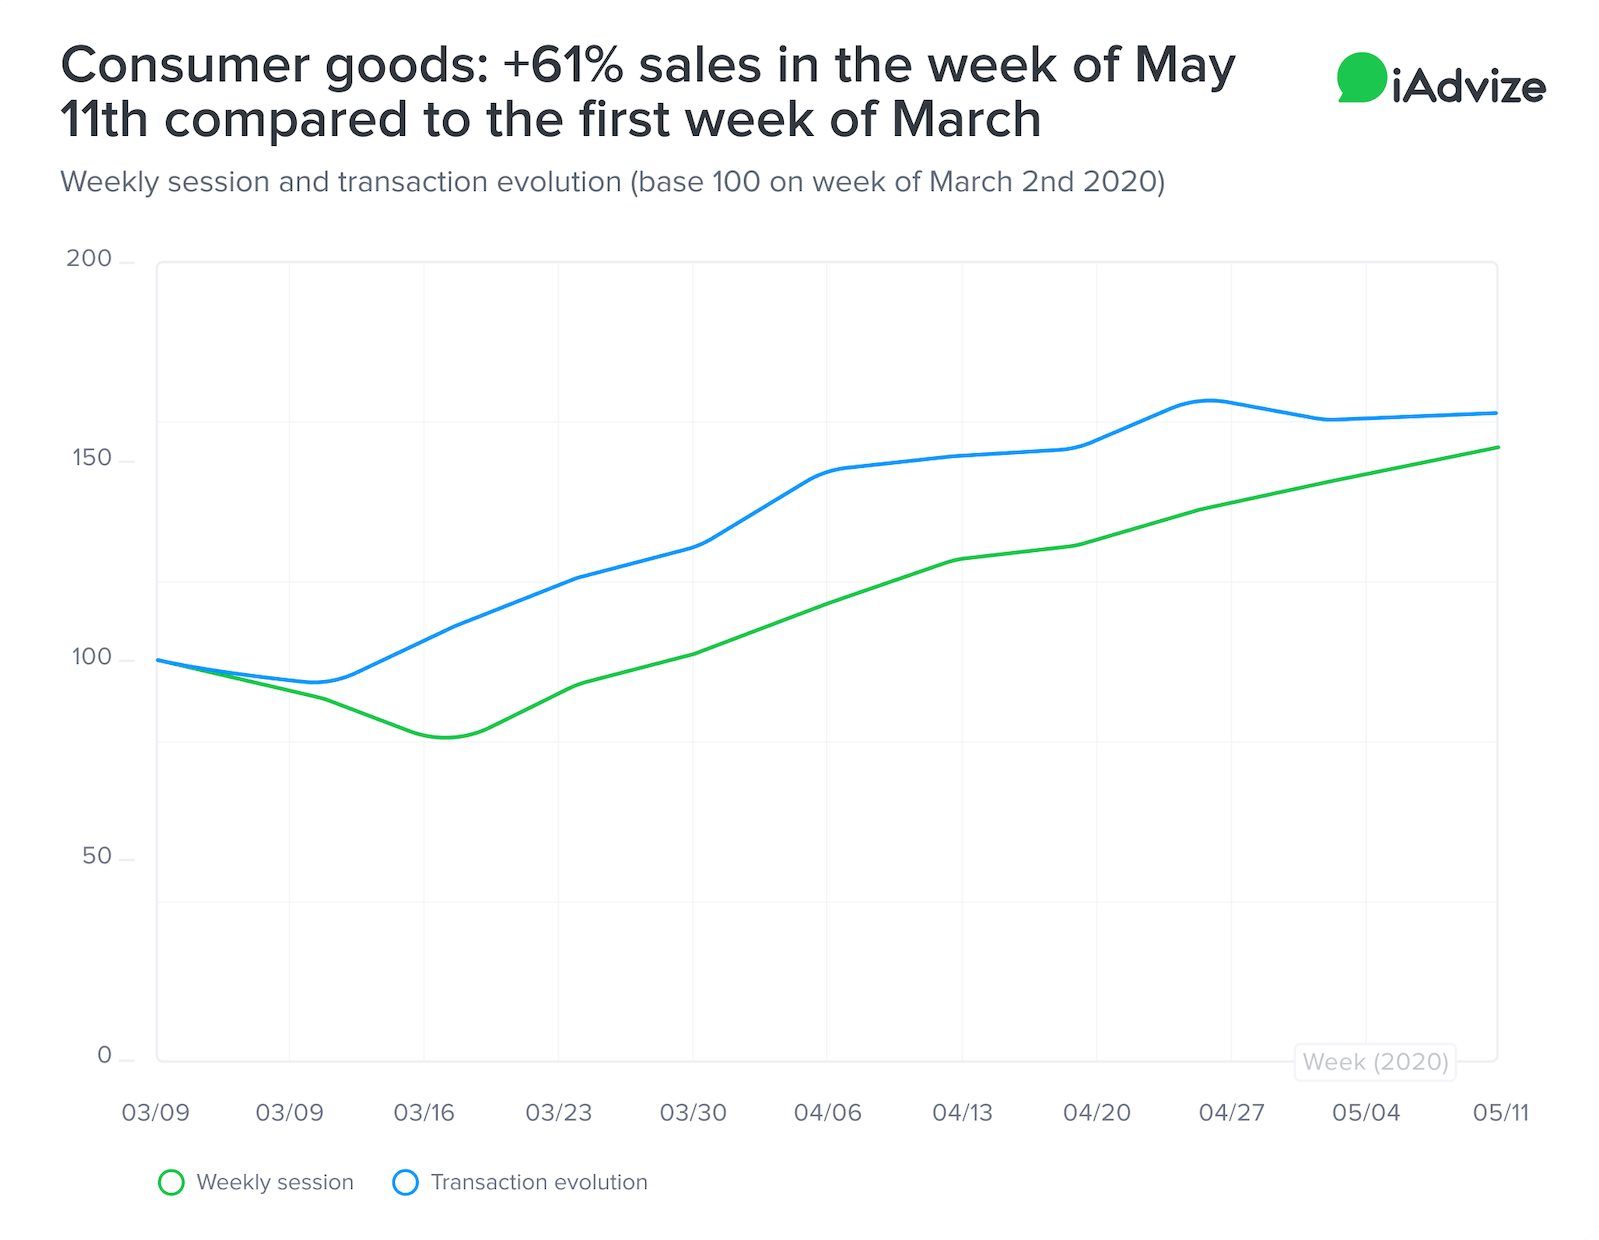 Consumer Goods sales increase from May - March 2020